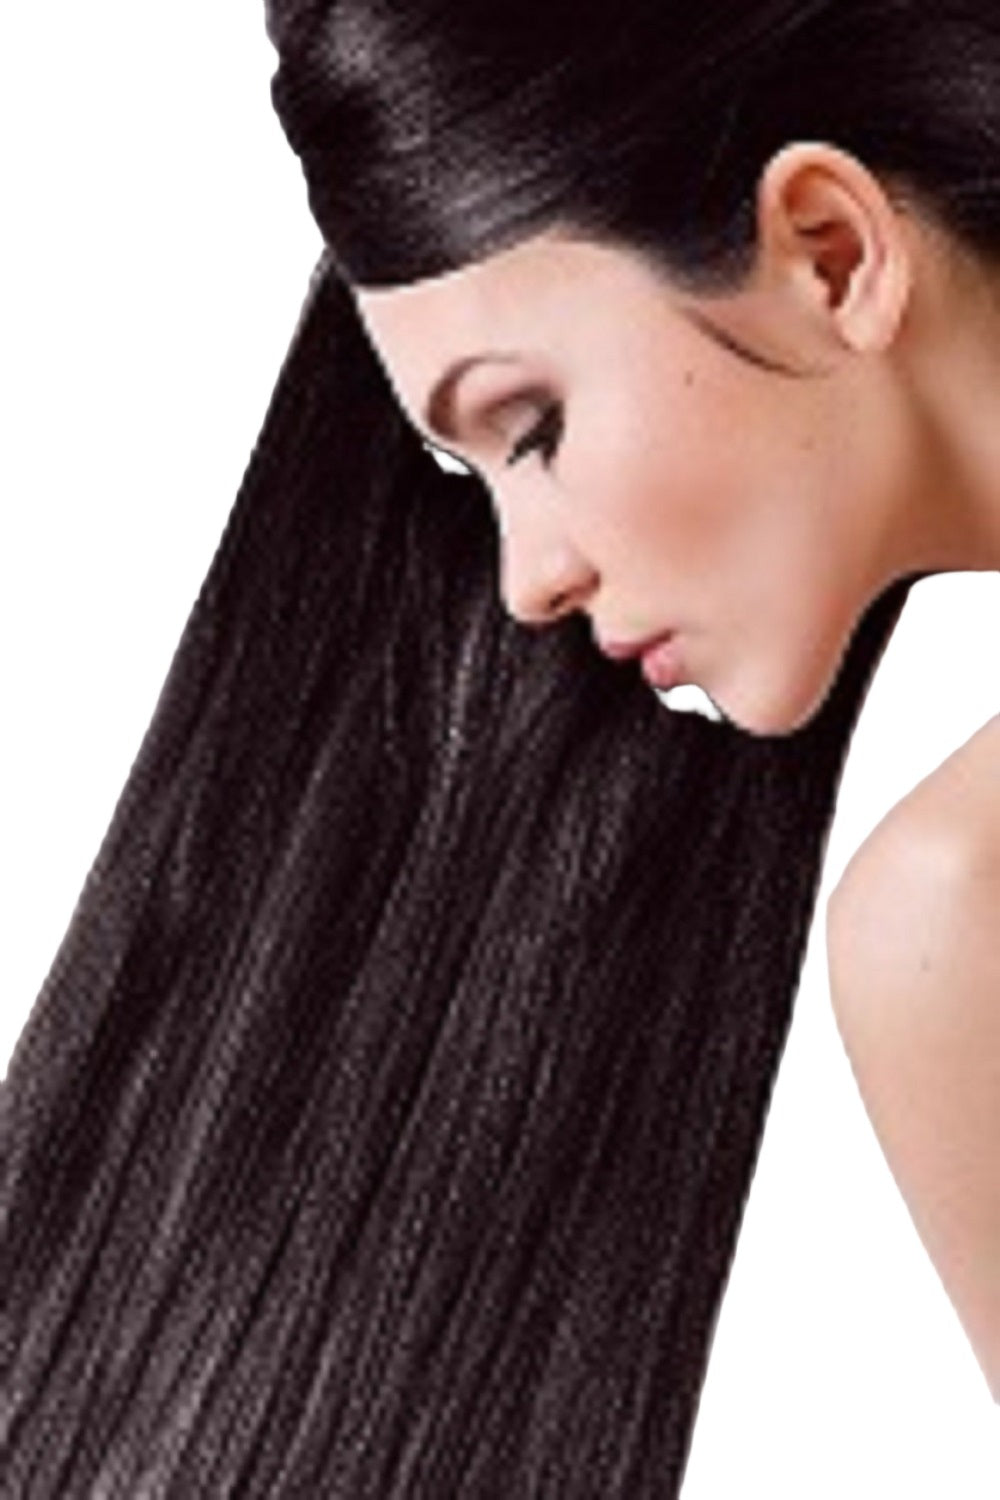 Sanotint black Classic hair dye without ammonia contains less chemicals and protects hair from drying out. Sanotint is a very popular hair and sold in the UK since 2007